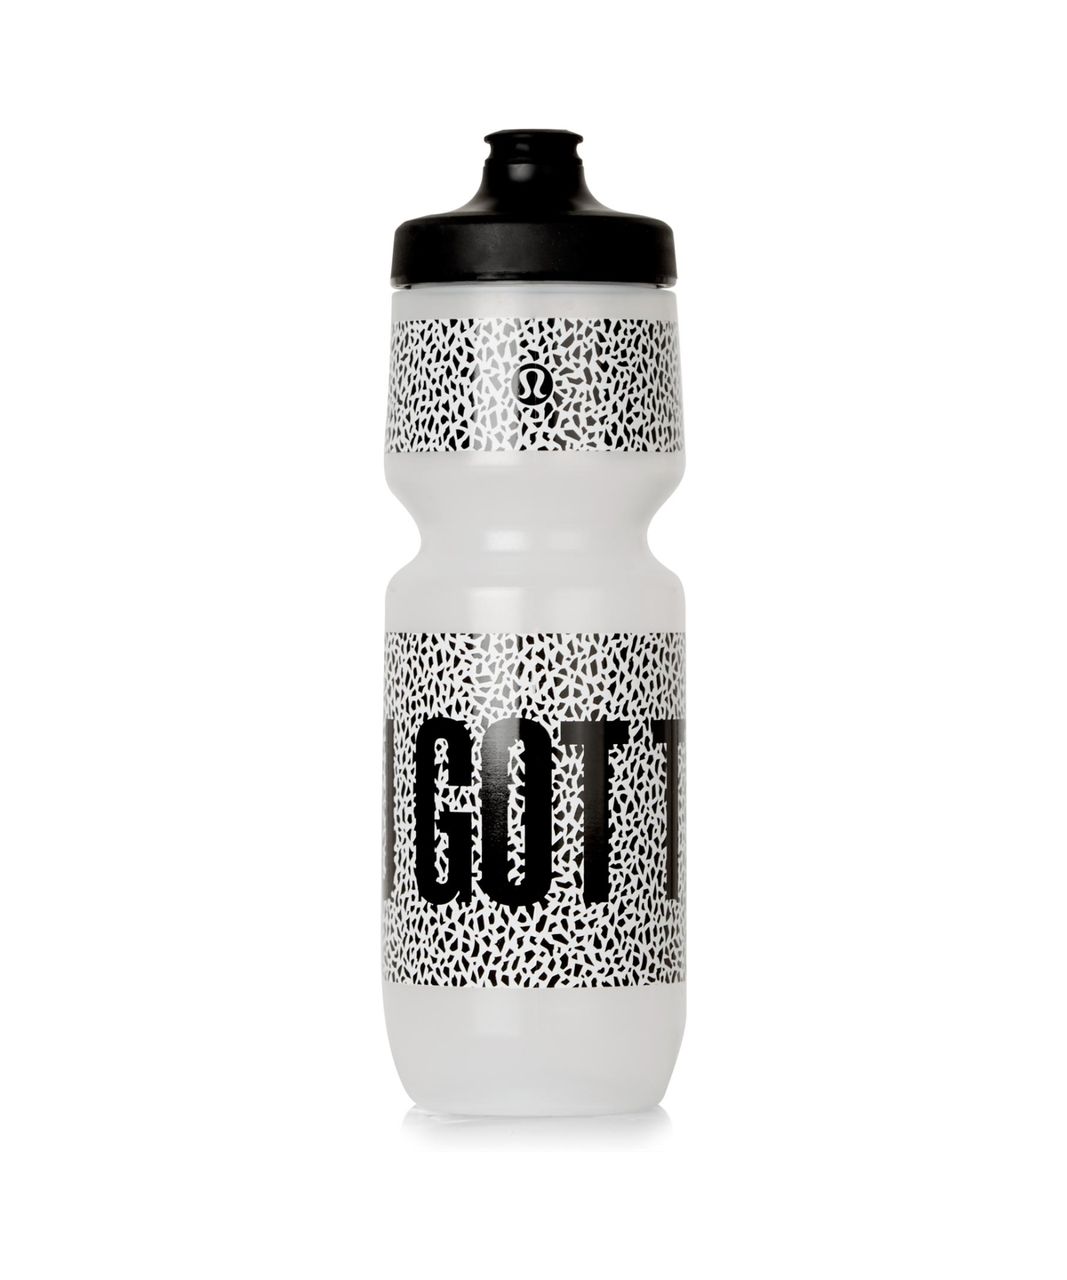 Lululemon Purist Cycling Waterbottle - You Got This Purist